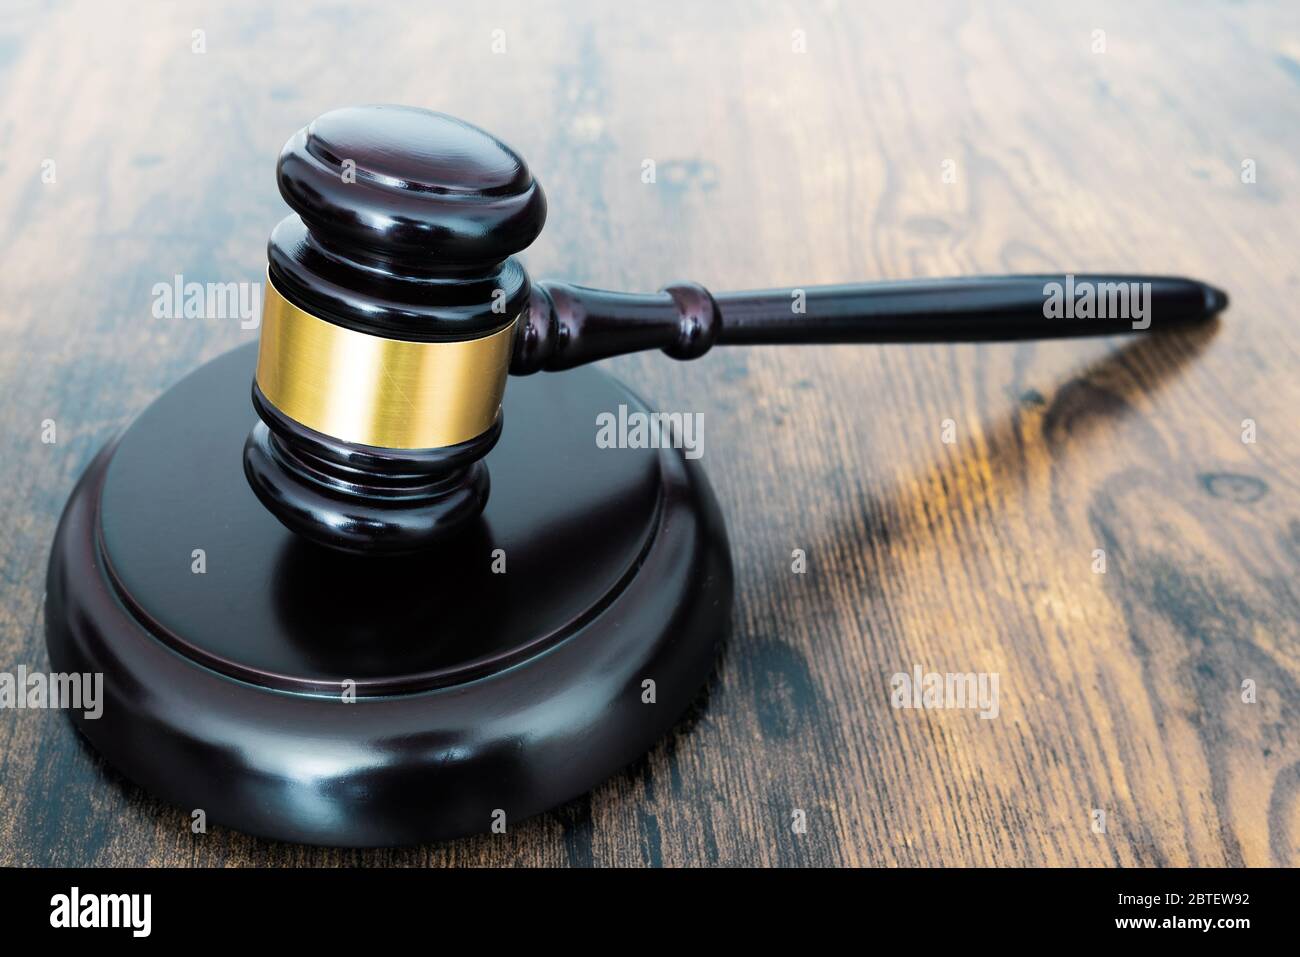 close-up of judges gavel or auction hammer on wooden table Stock Photo